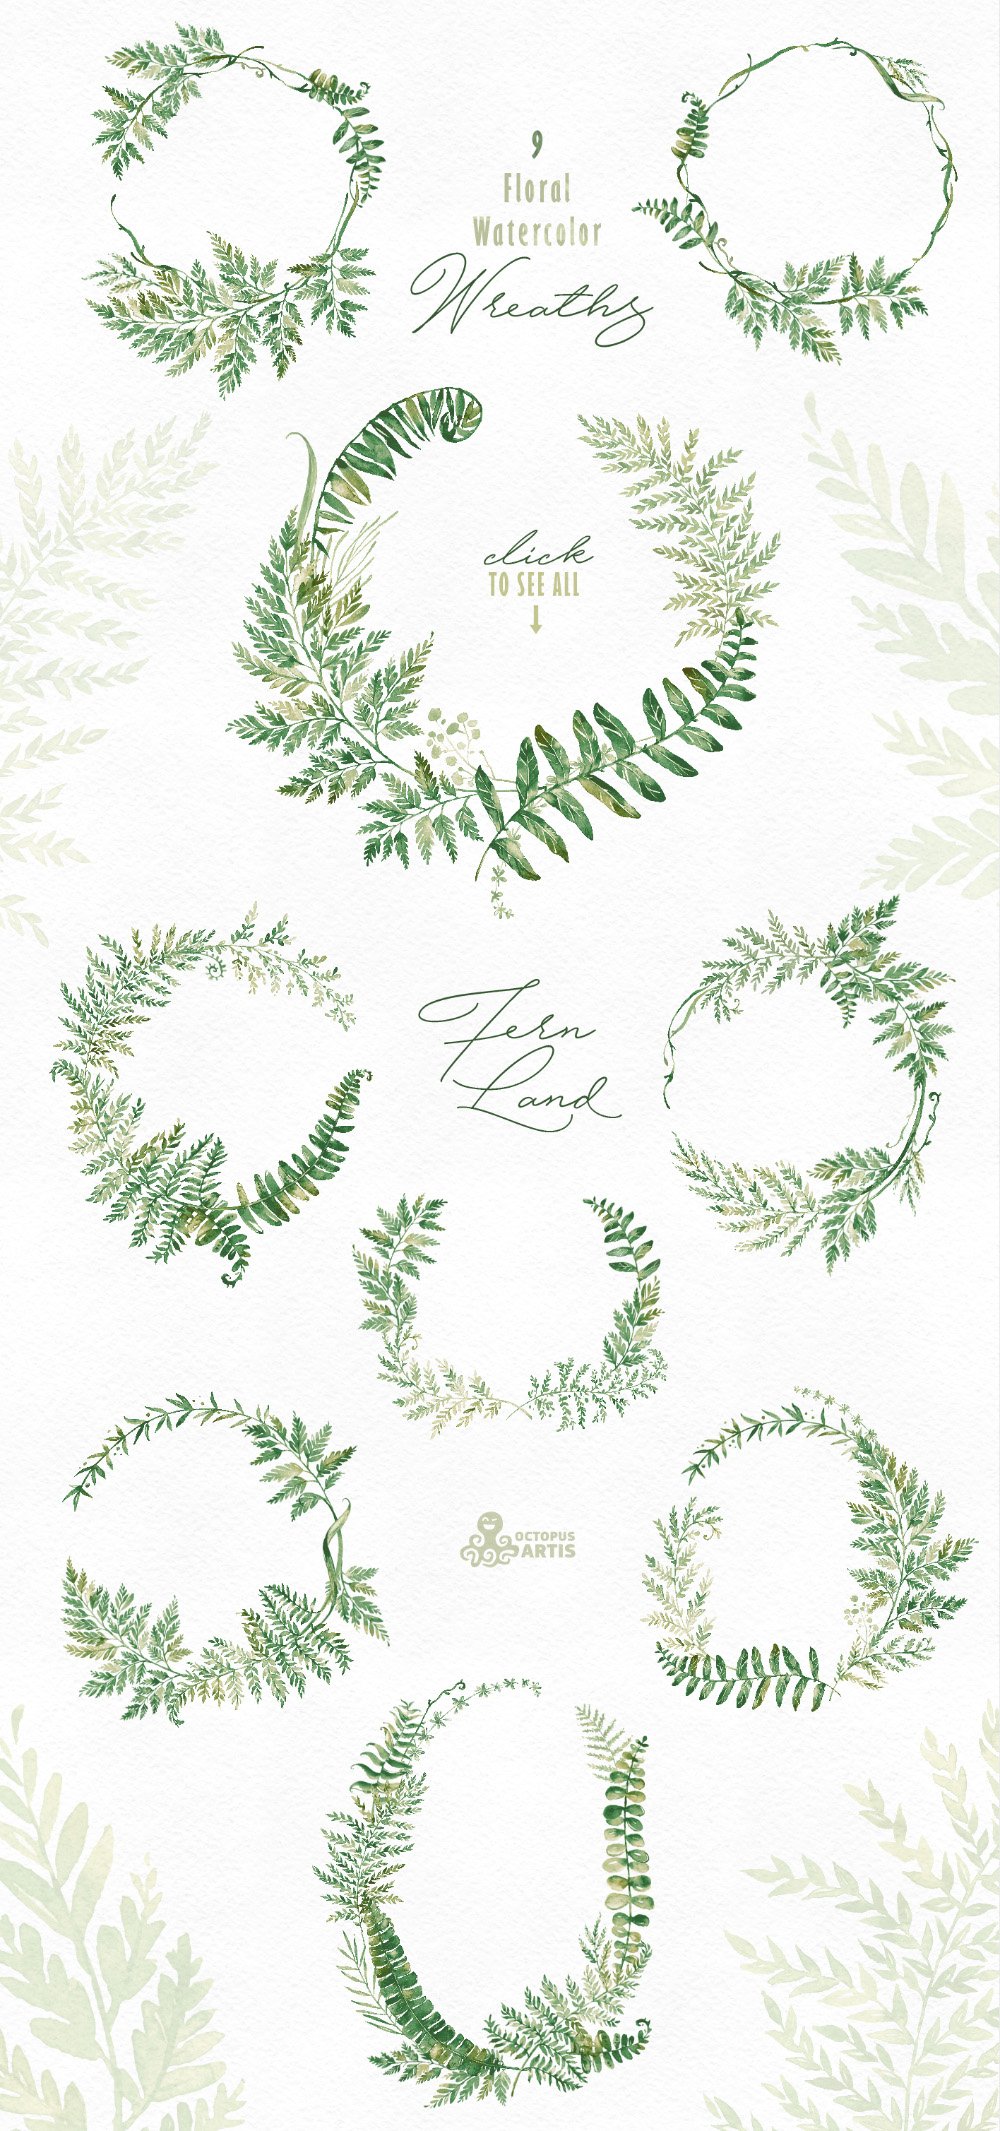 Fern Land. Watercolor Collection preview image.